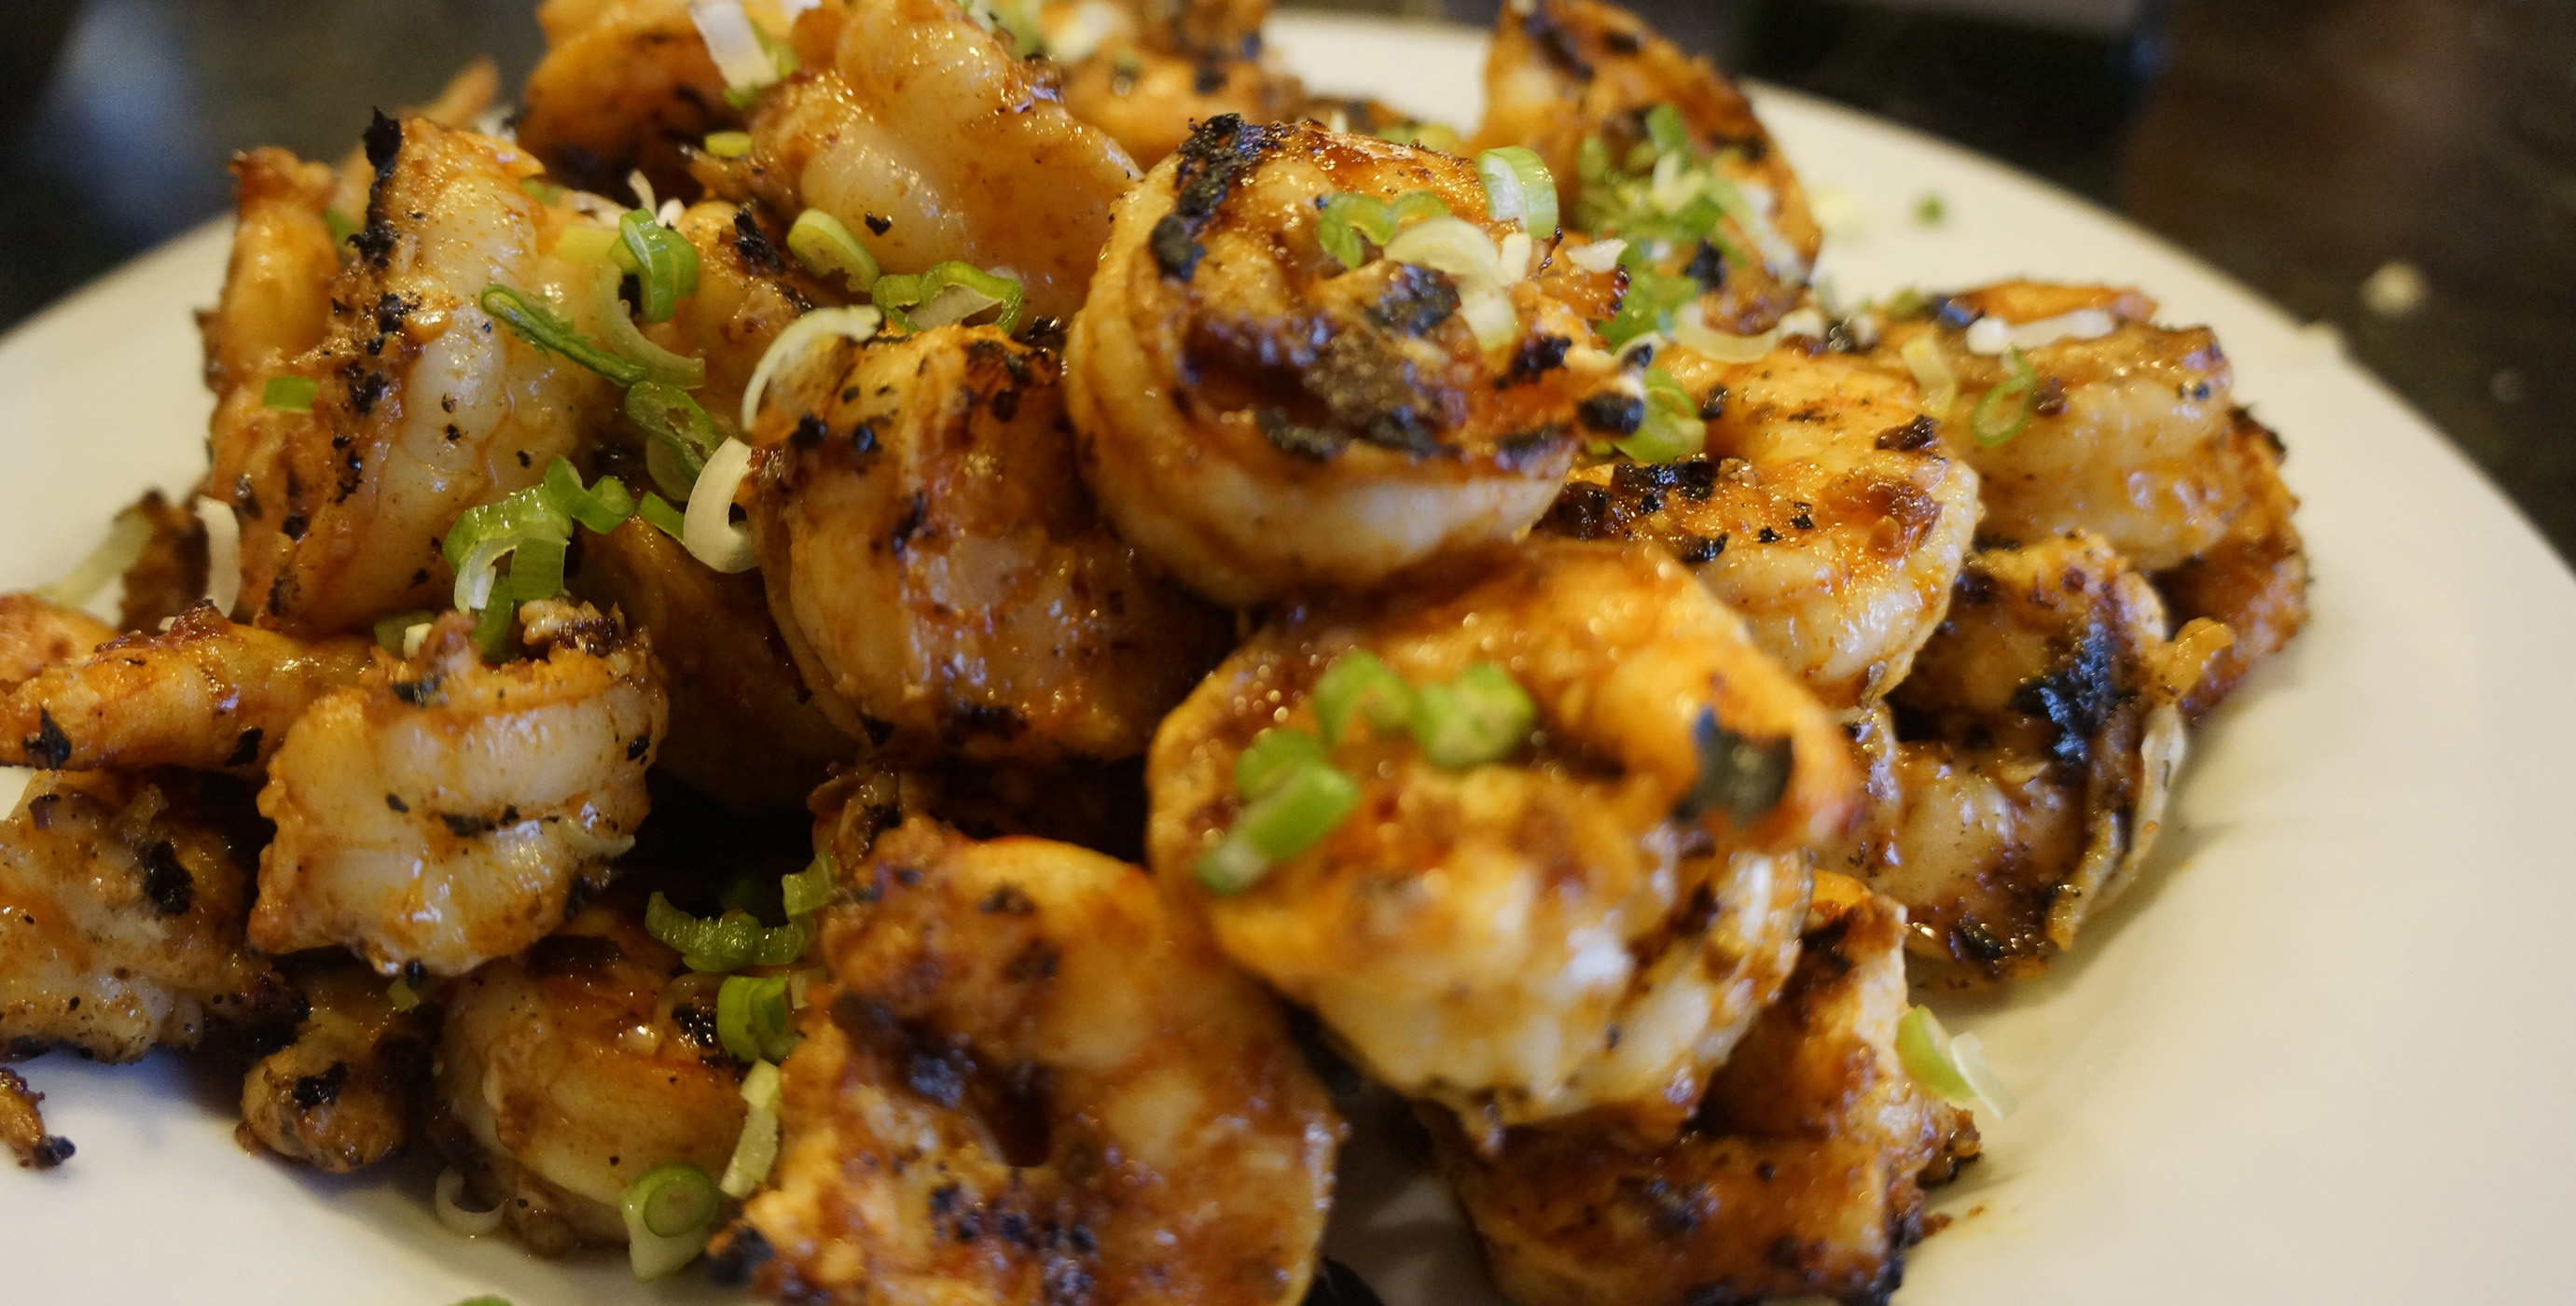 Chipotle Barbecued Shrimp